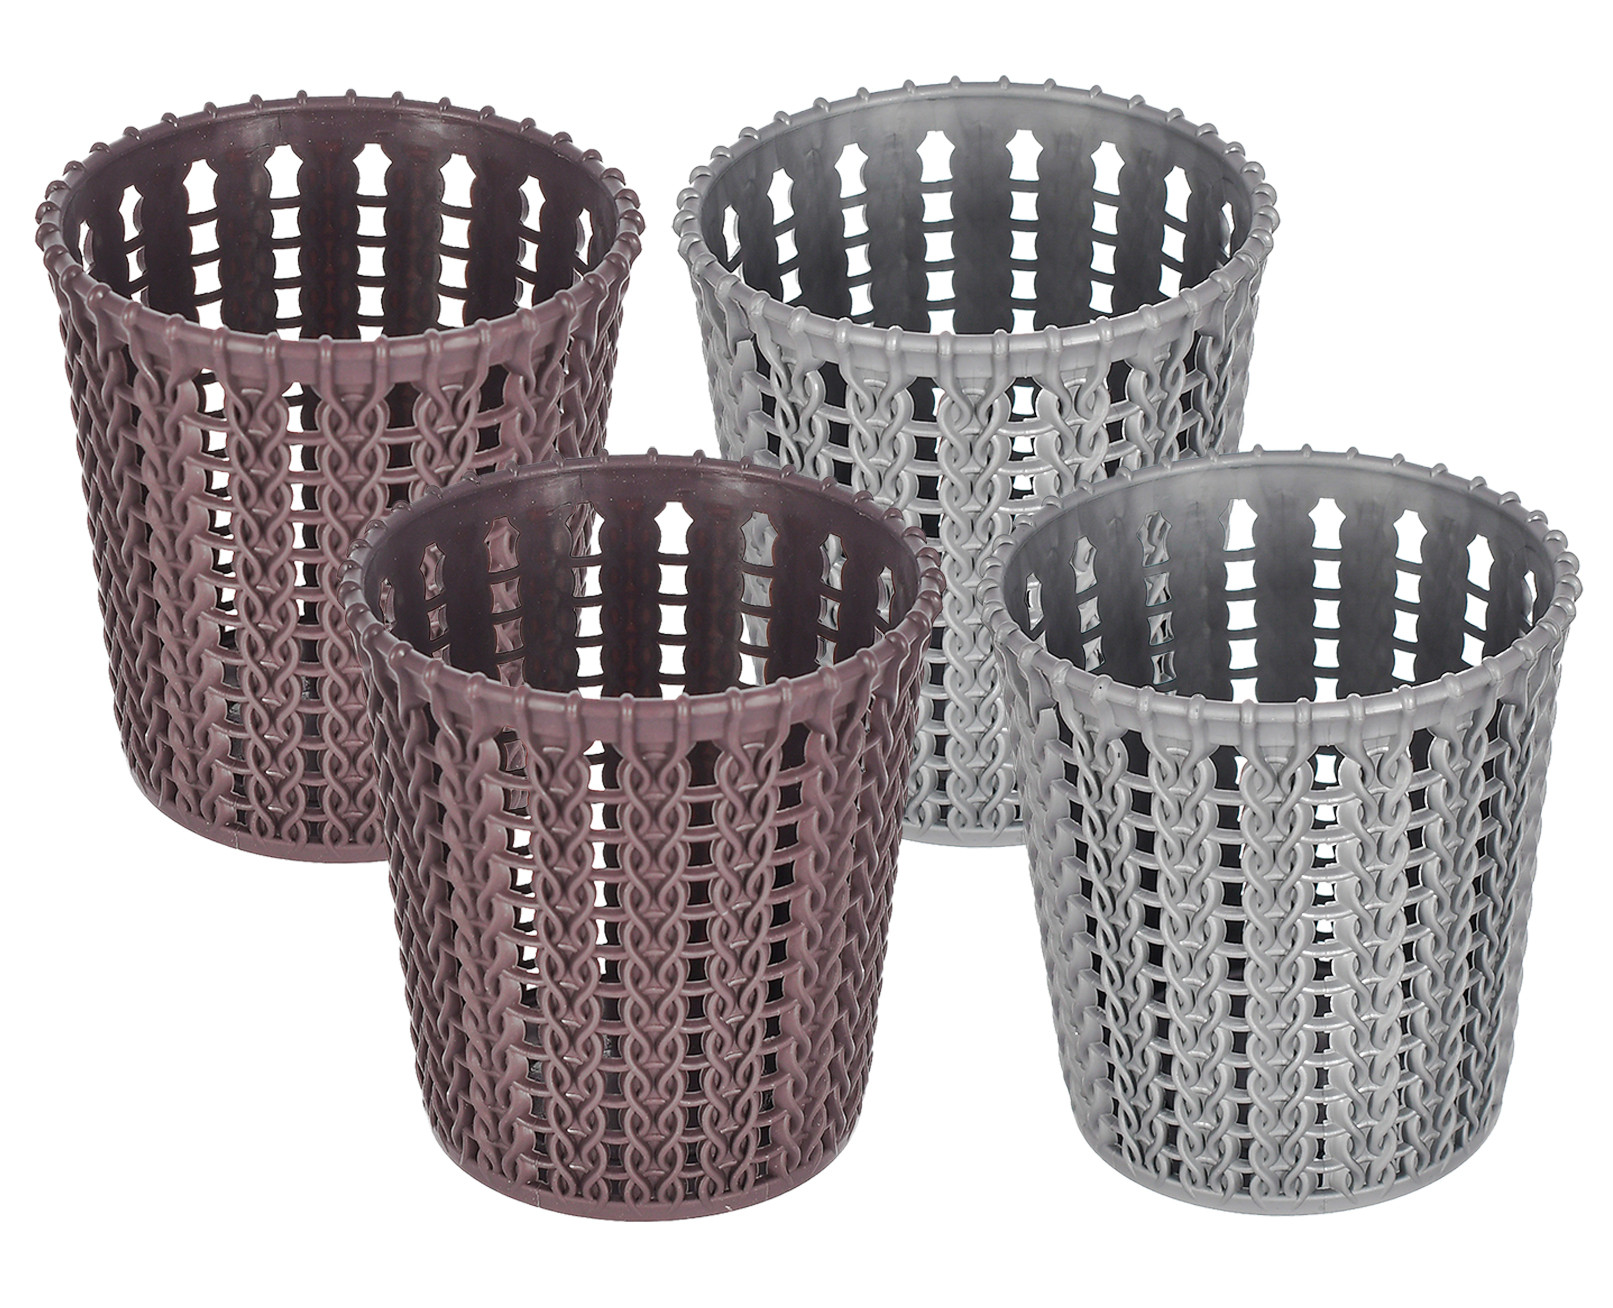 Kuber Industries Round Shape M 10 Multipurpose Plastic Holder/Organizer/Stand For Kitchen, Bathroom, Office Use - Pack of 4 (Brown & Grey)-46KM0433